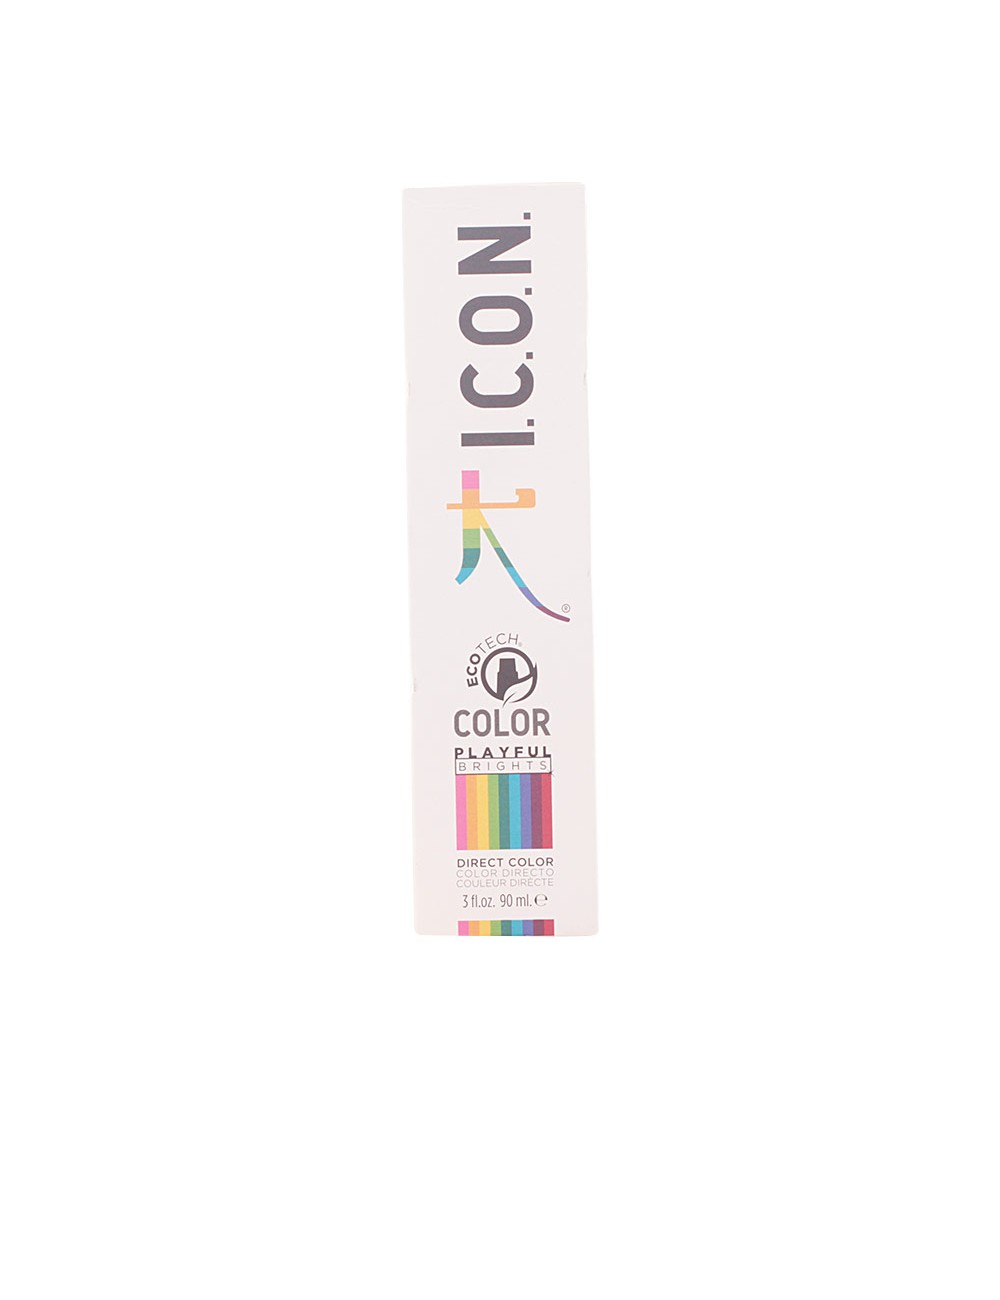 PLAYFUL BRIGHTS direct color 90ml